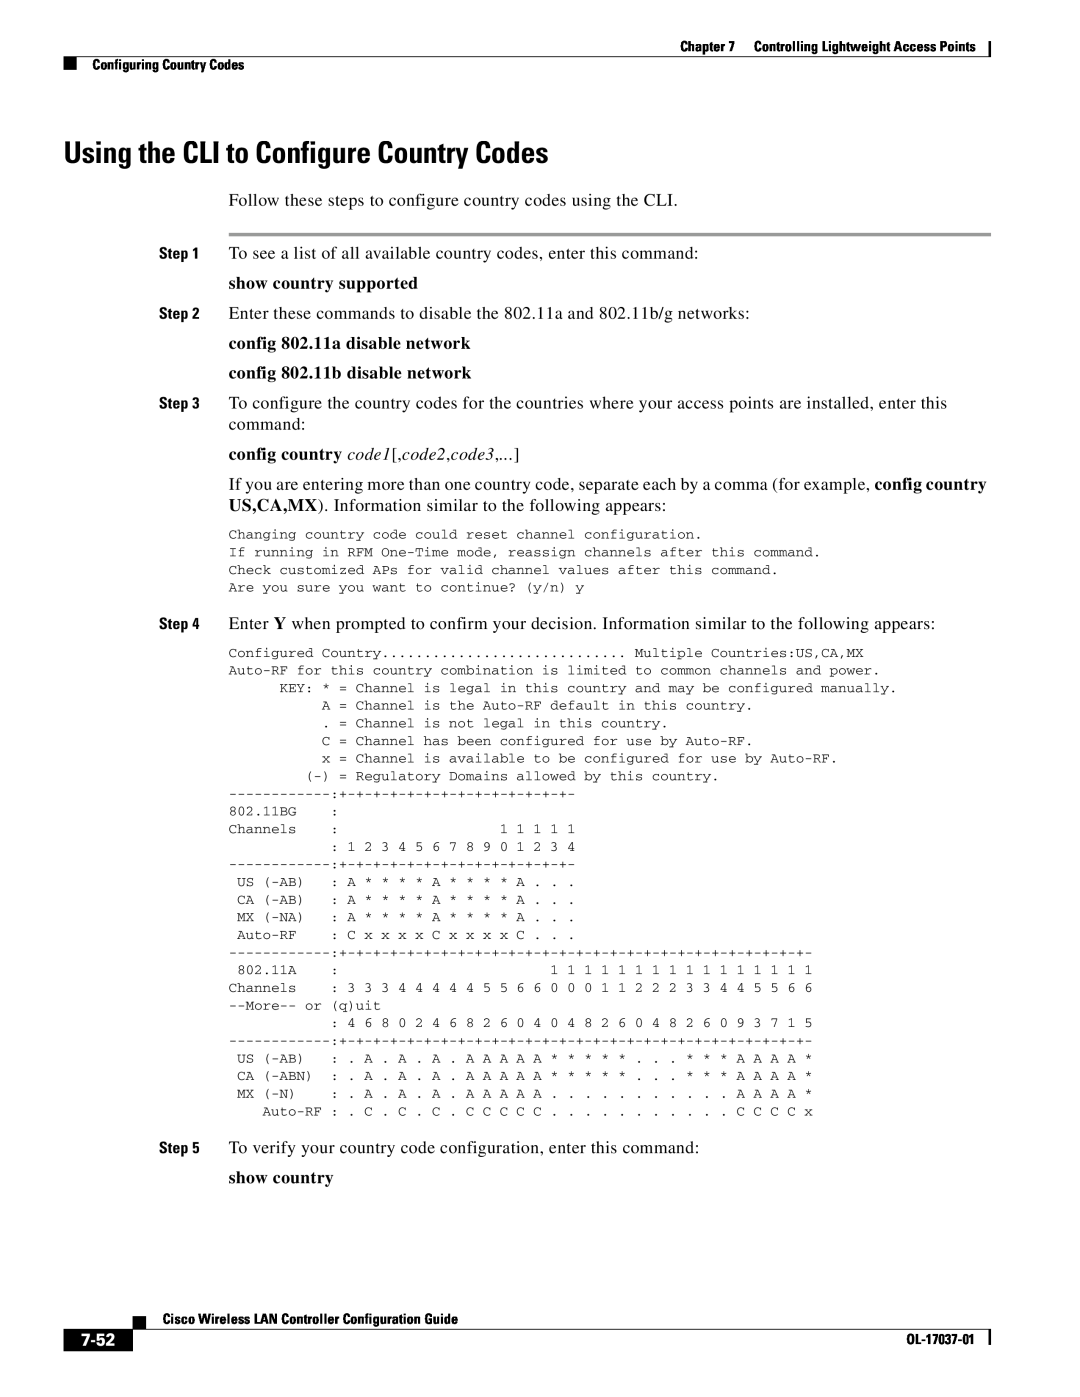 Cisco Systems OL-17037-01 manual Using the CLI to Configure Country Codes, show country supported, 7-52 